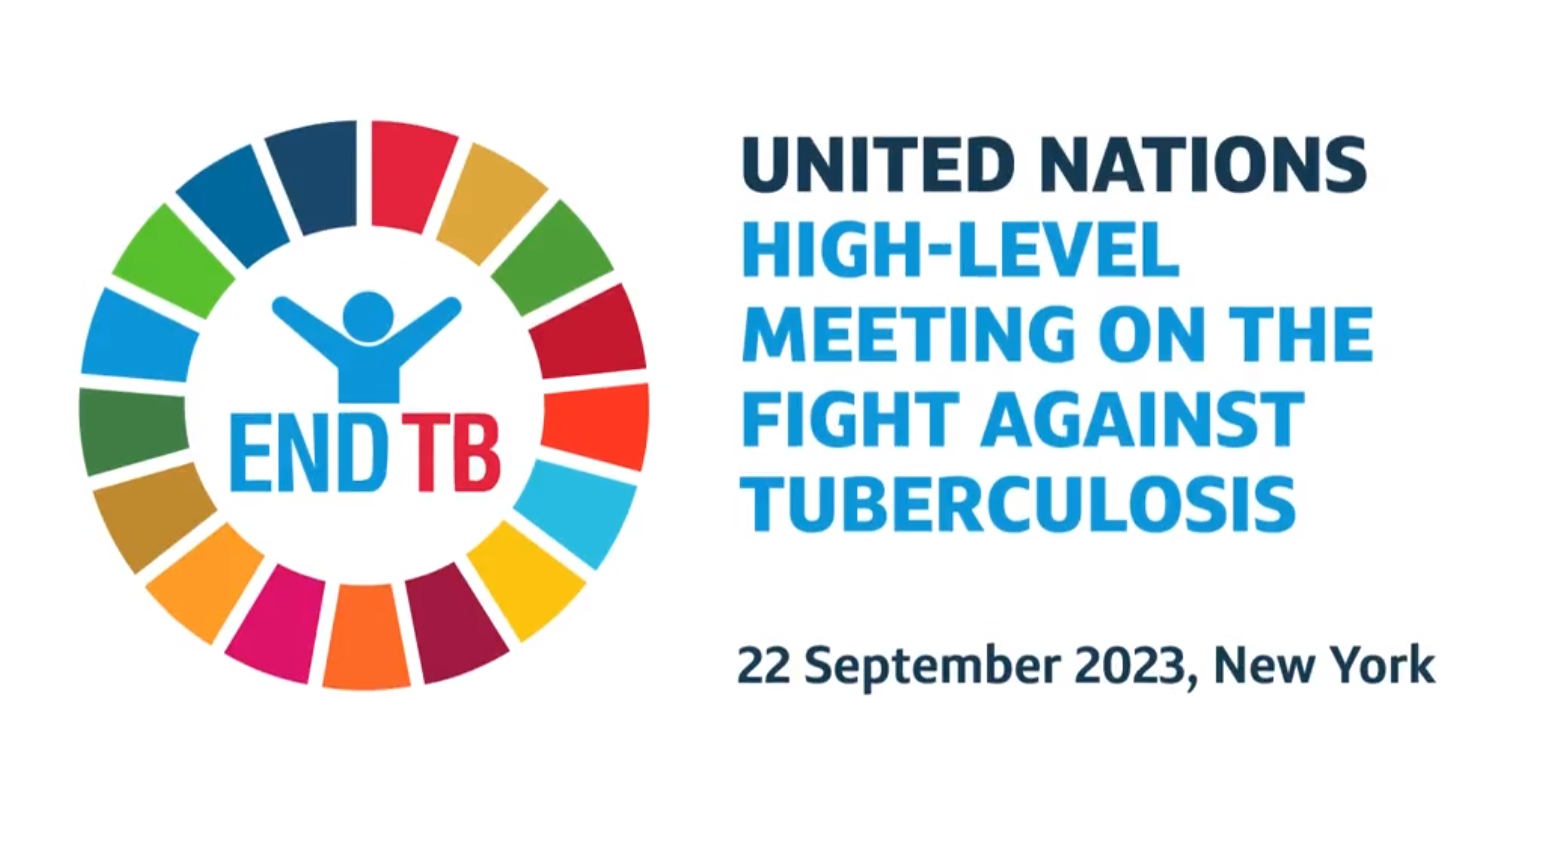 New global action pledge to end TB by 2030